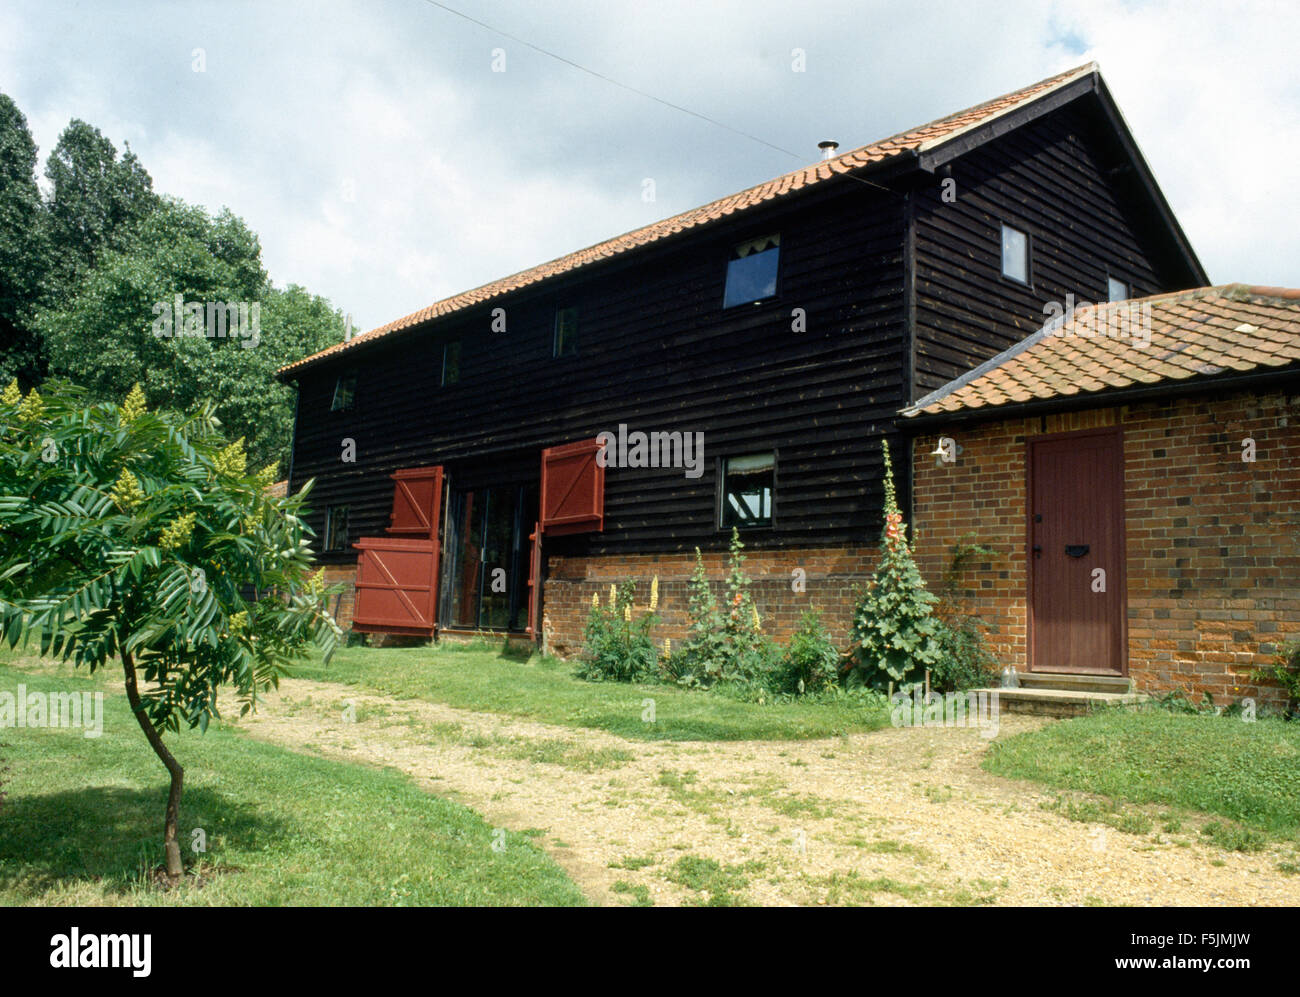 Exterior of a barn conversion with dark wood cladding Stock Photo